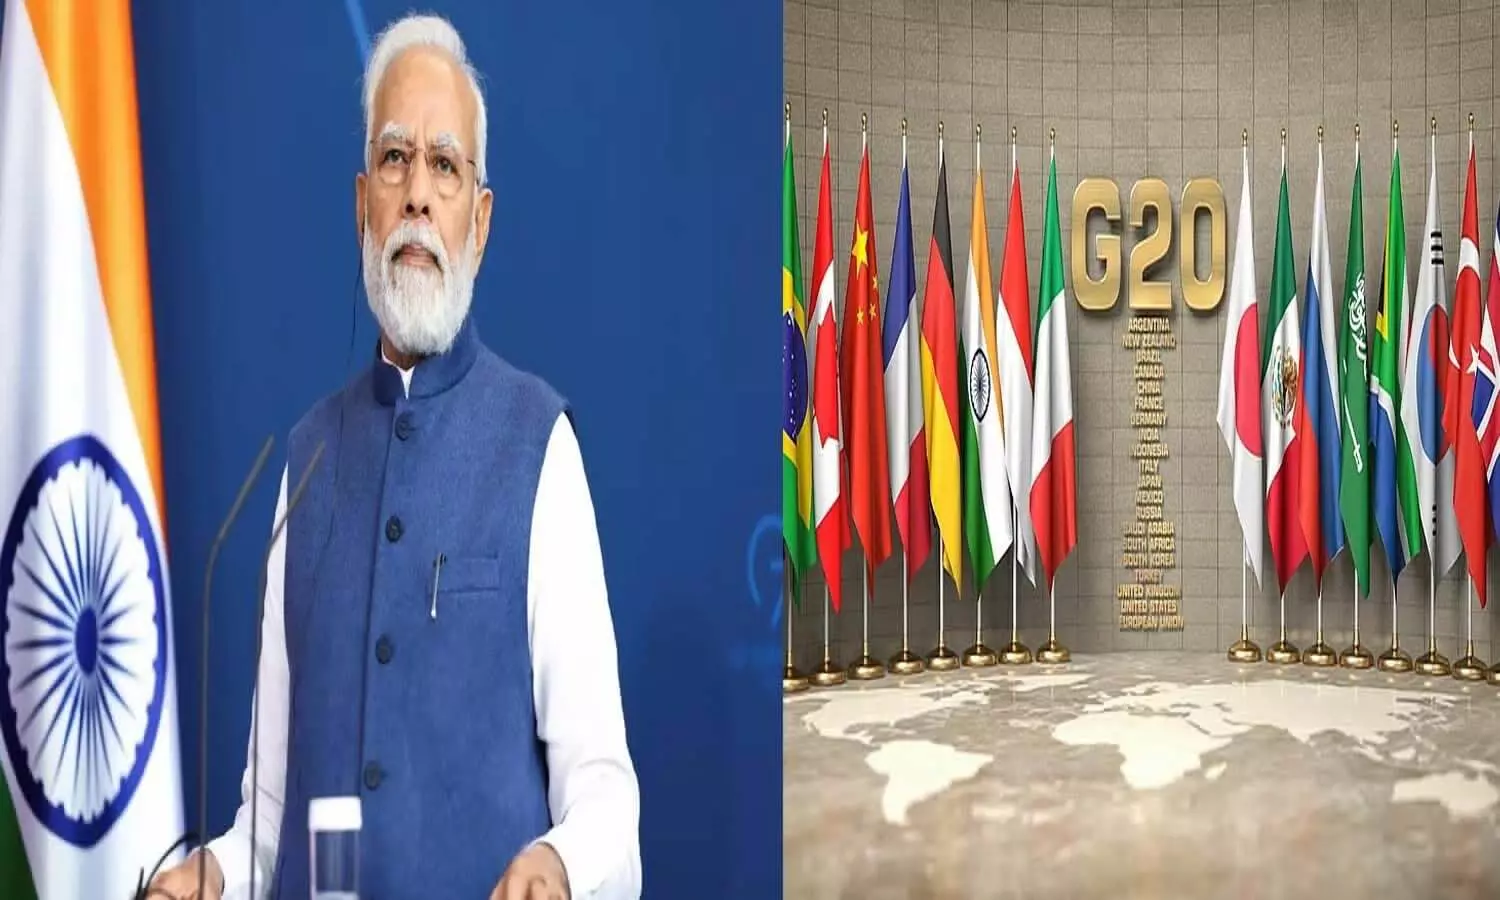 Government started preparations for G-20 summit, know why the conference is important for India